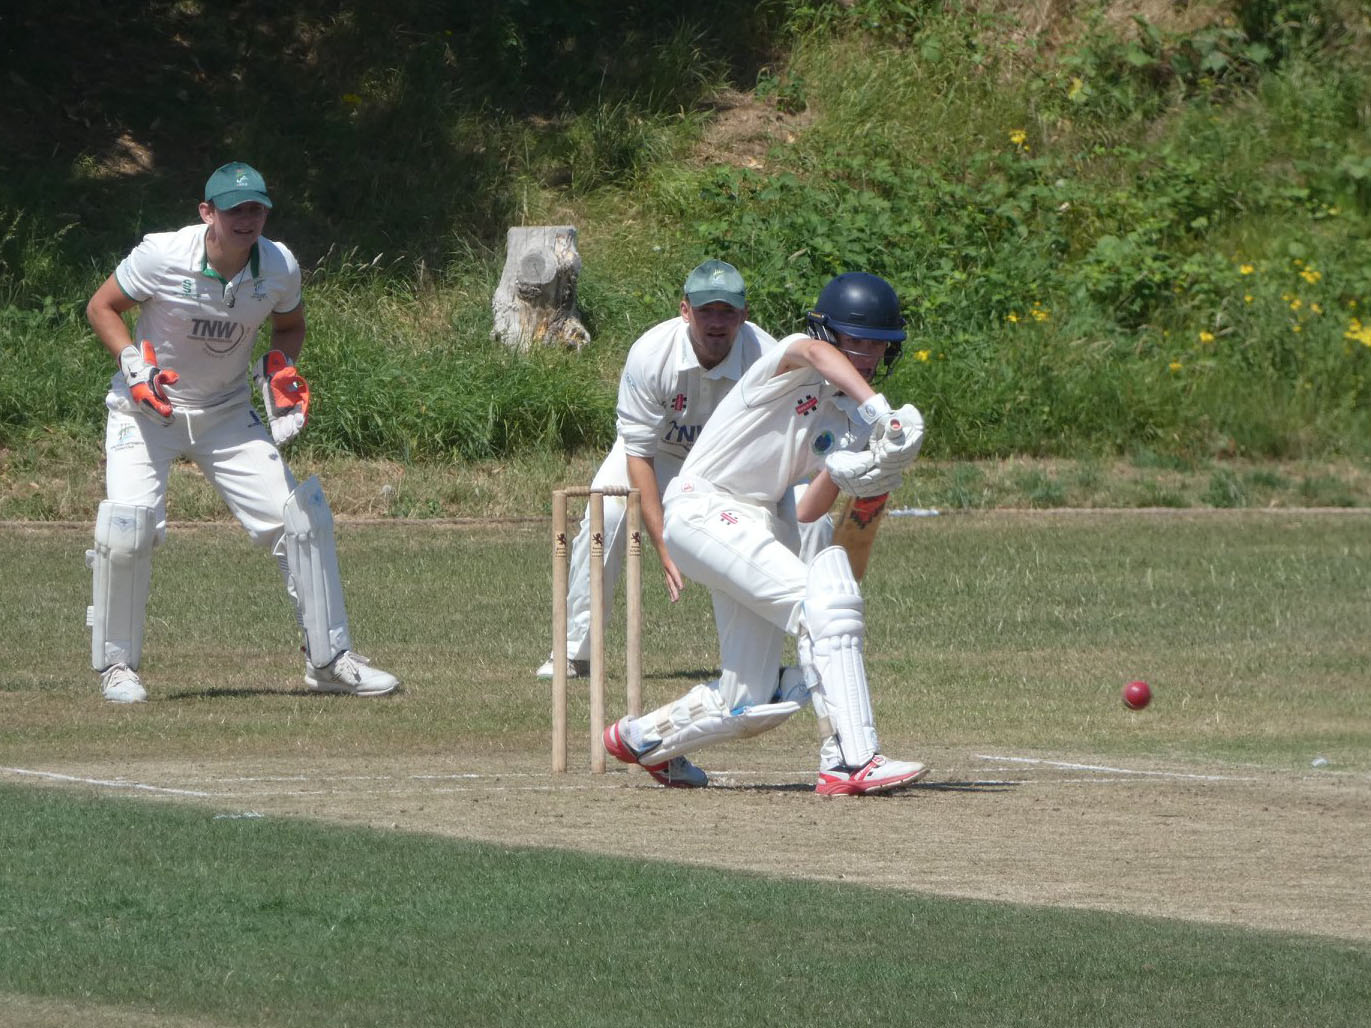 Jake Pascoe batting for Ashburton in the 10-wicket defeat at Shaldon